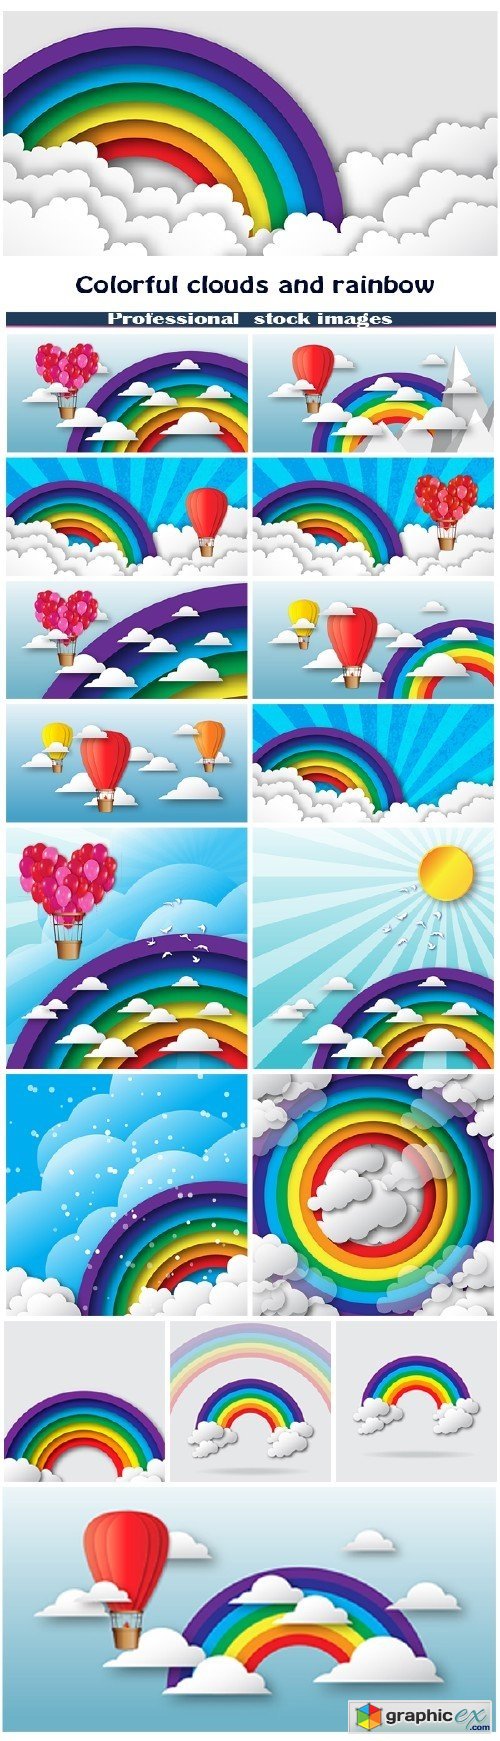 Origami stylized paper colorful clouds and rainbow with blue sky